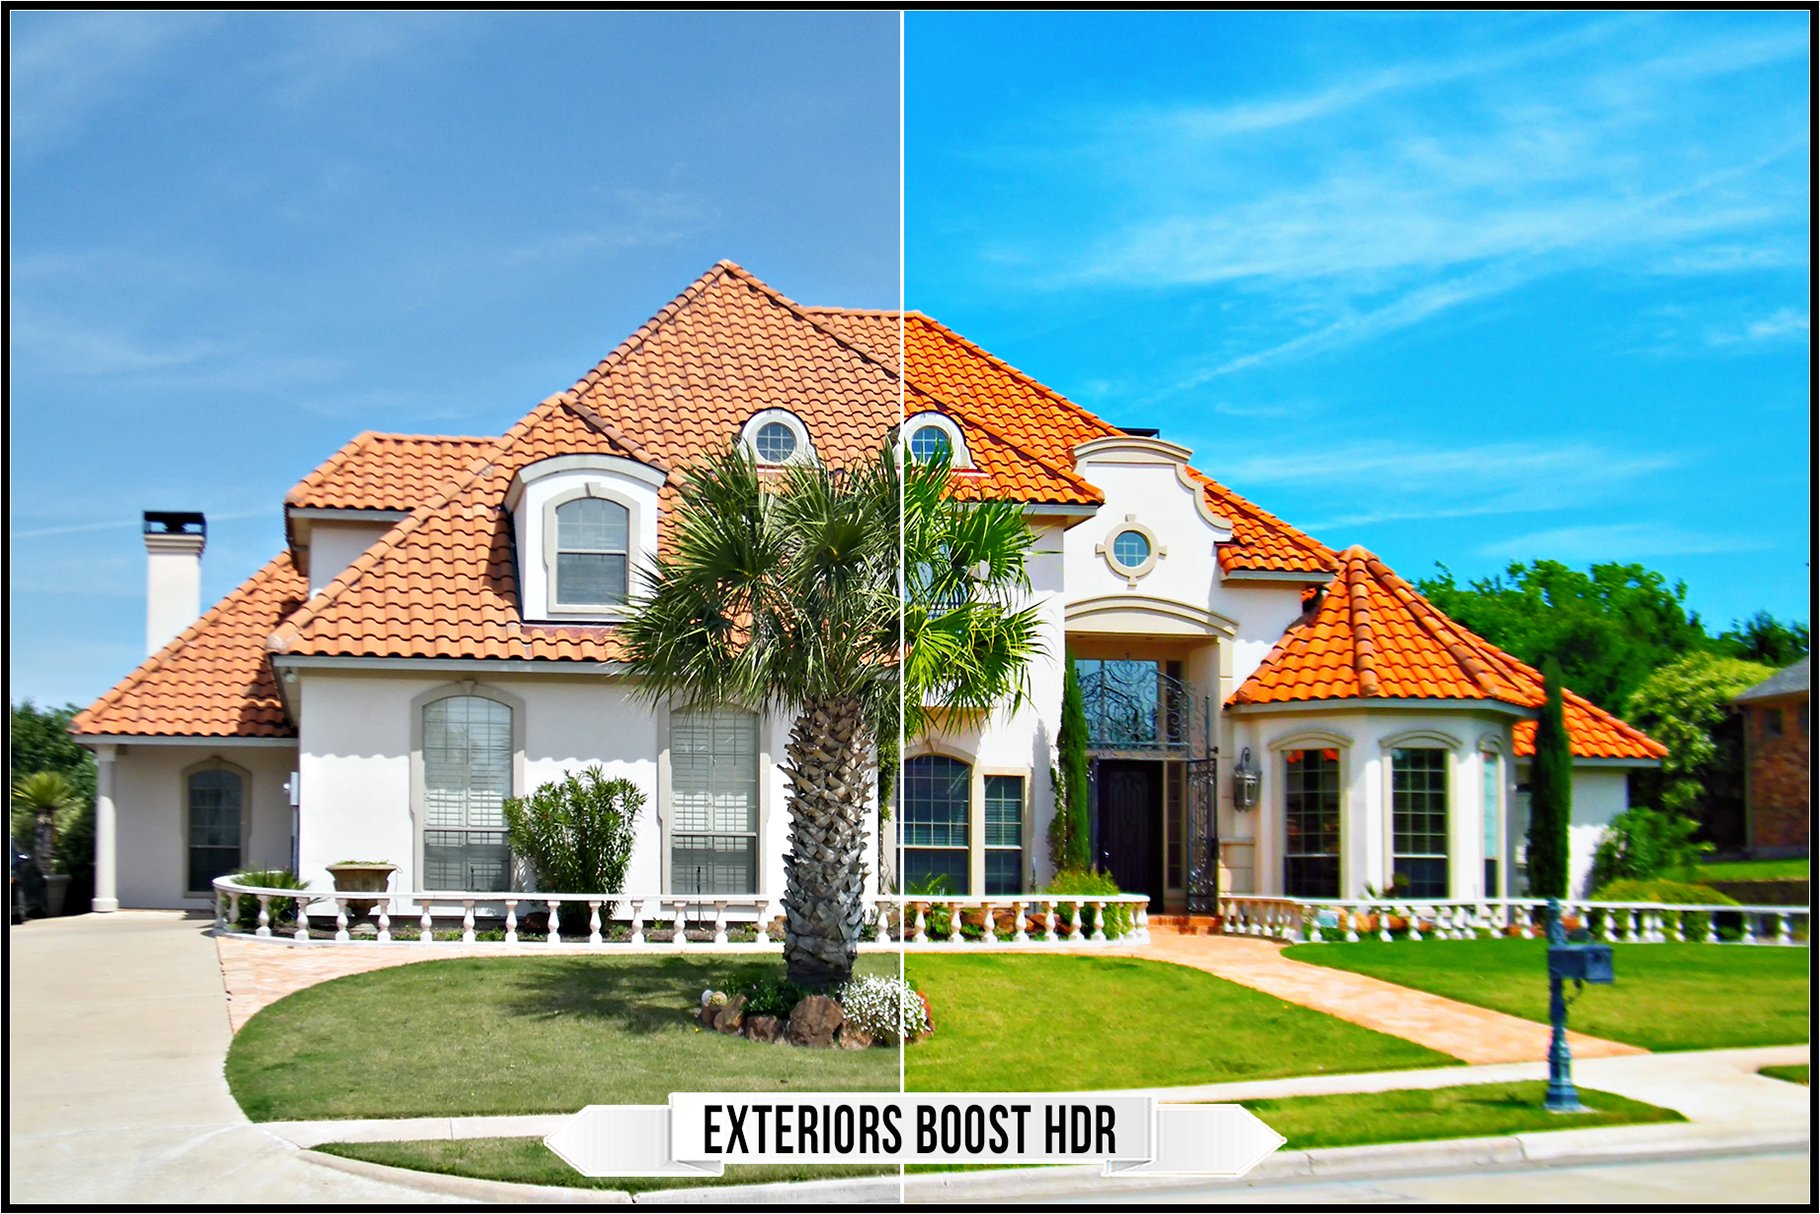 exteriors boost hdr 762